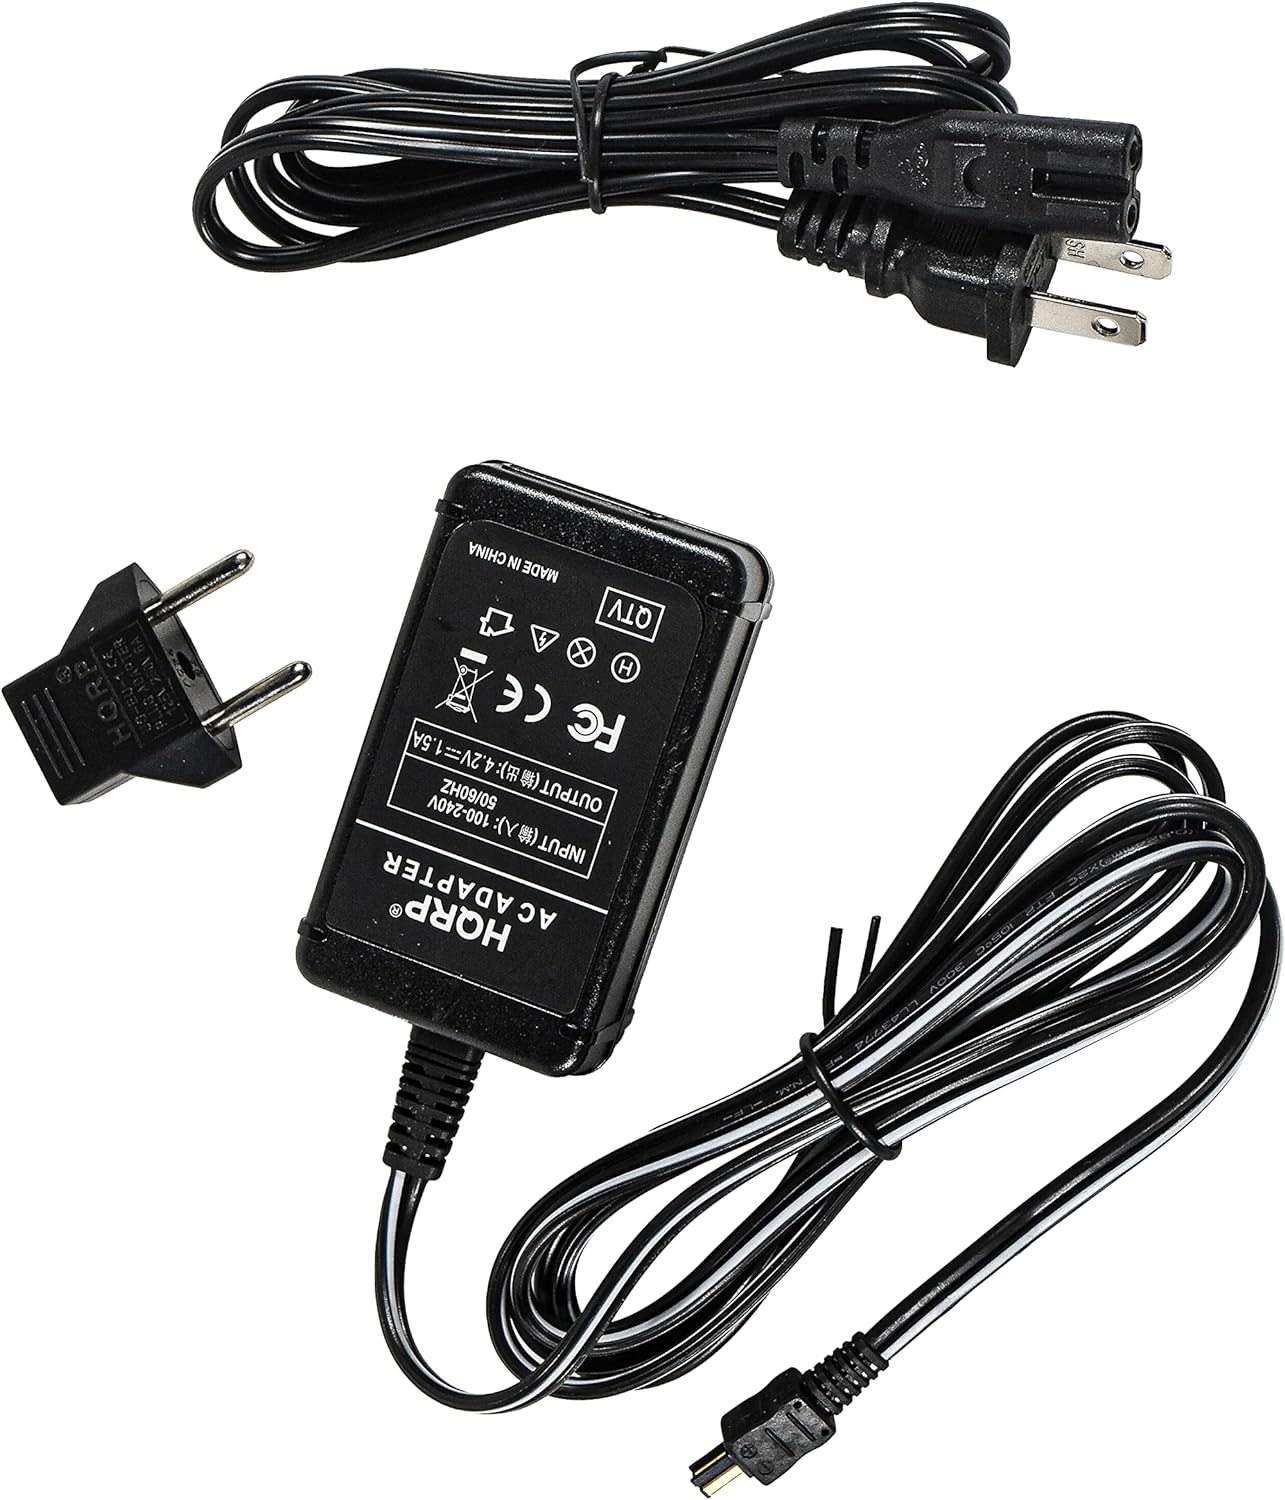 AC Adapter Compatible with Sony CyberShot AC-LS5K AC-LS5 DSC-G1 DSC-G3 DSC-W290 DSC-W300 DSC-P200 DSC-P150 DSC-P200/R DS - Click Image to Close